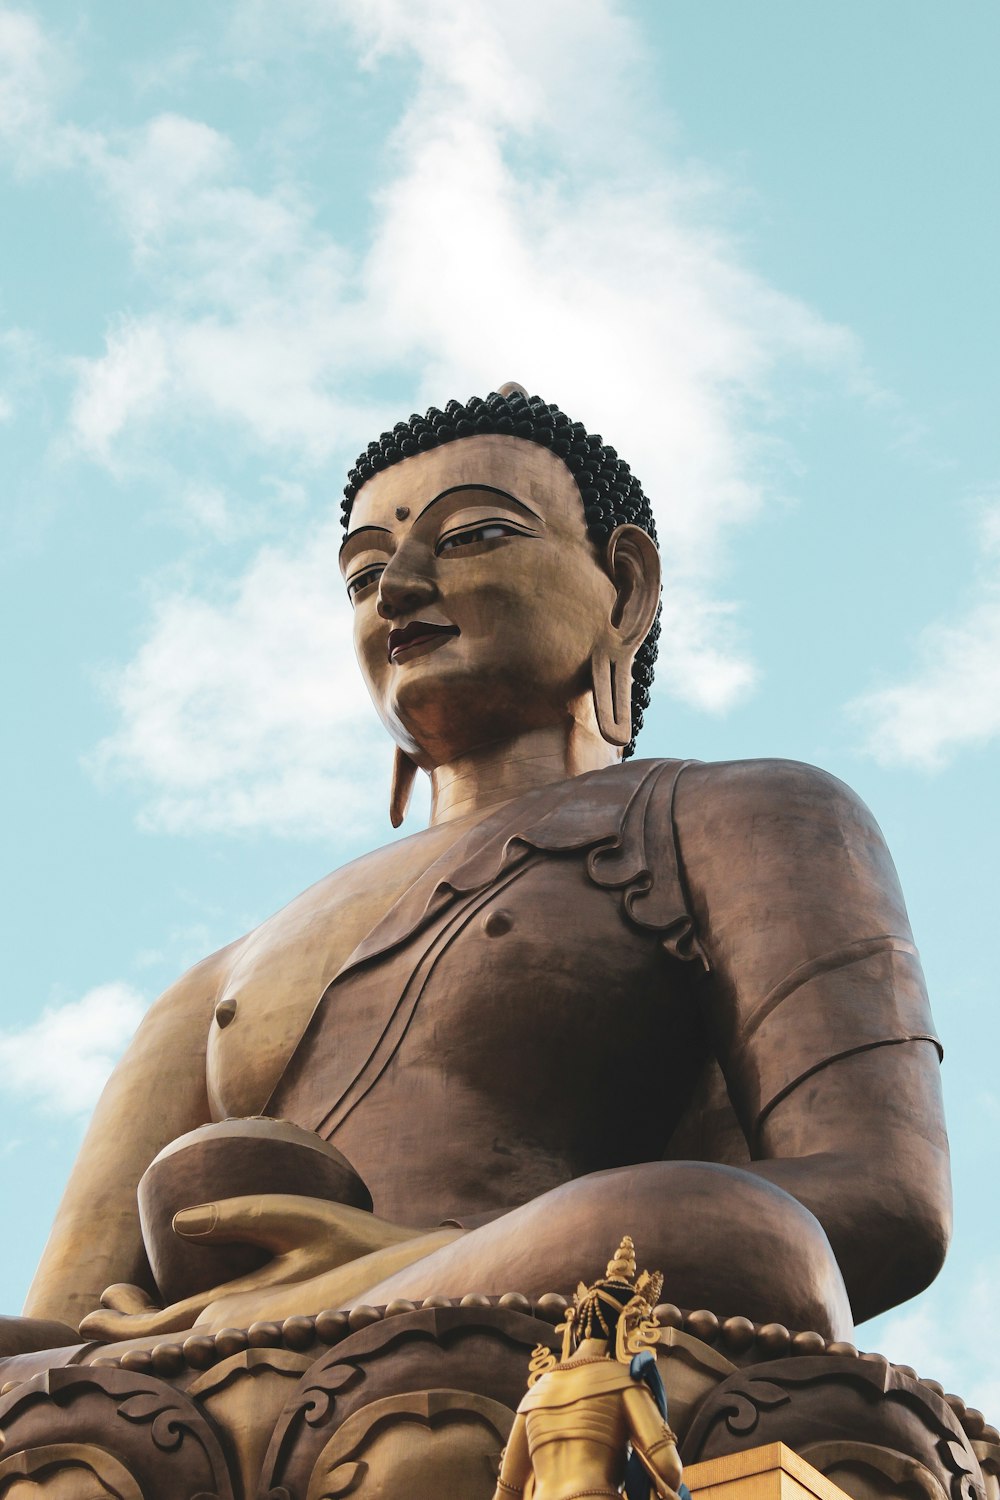 a large buddha statue sitting on top of a building